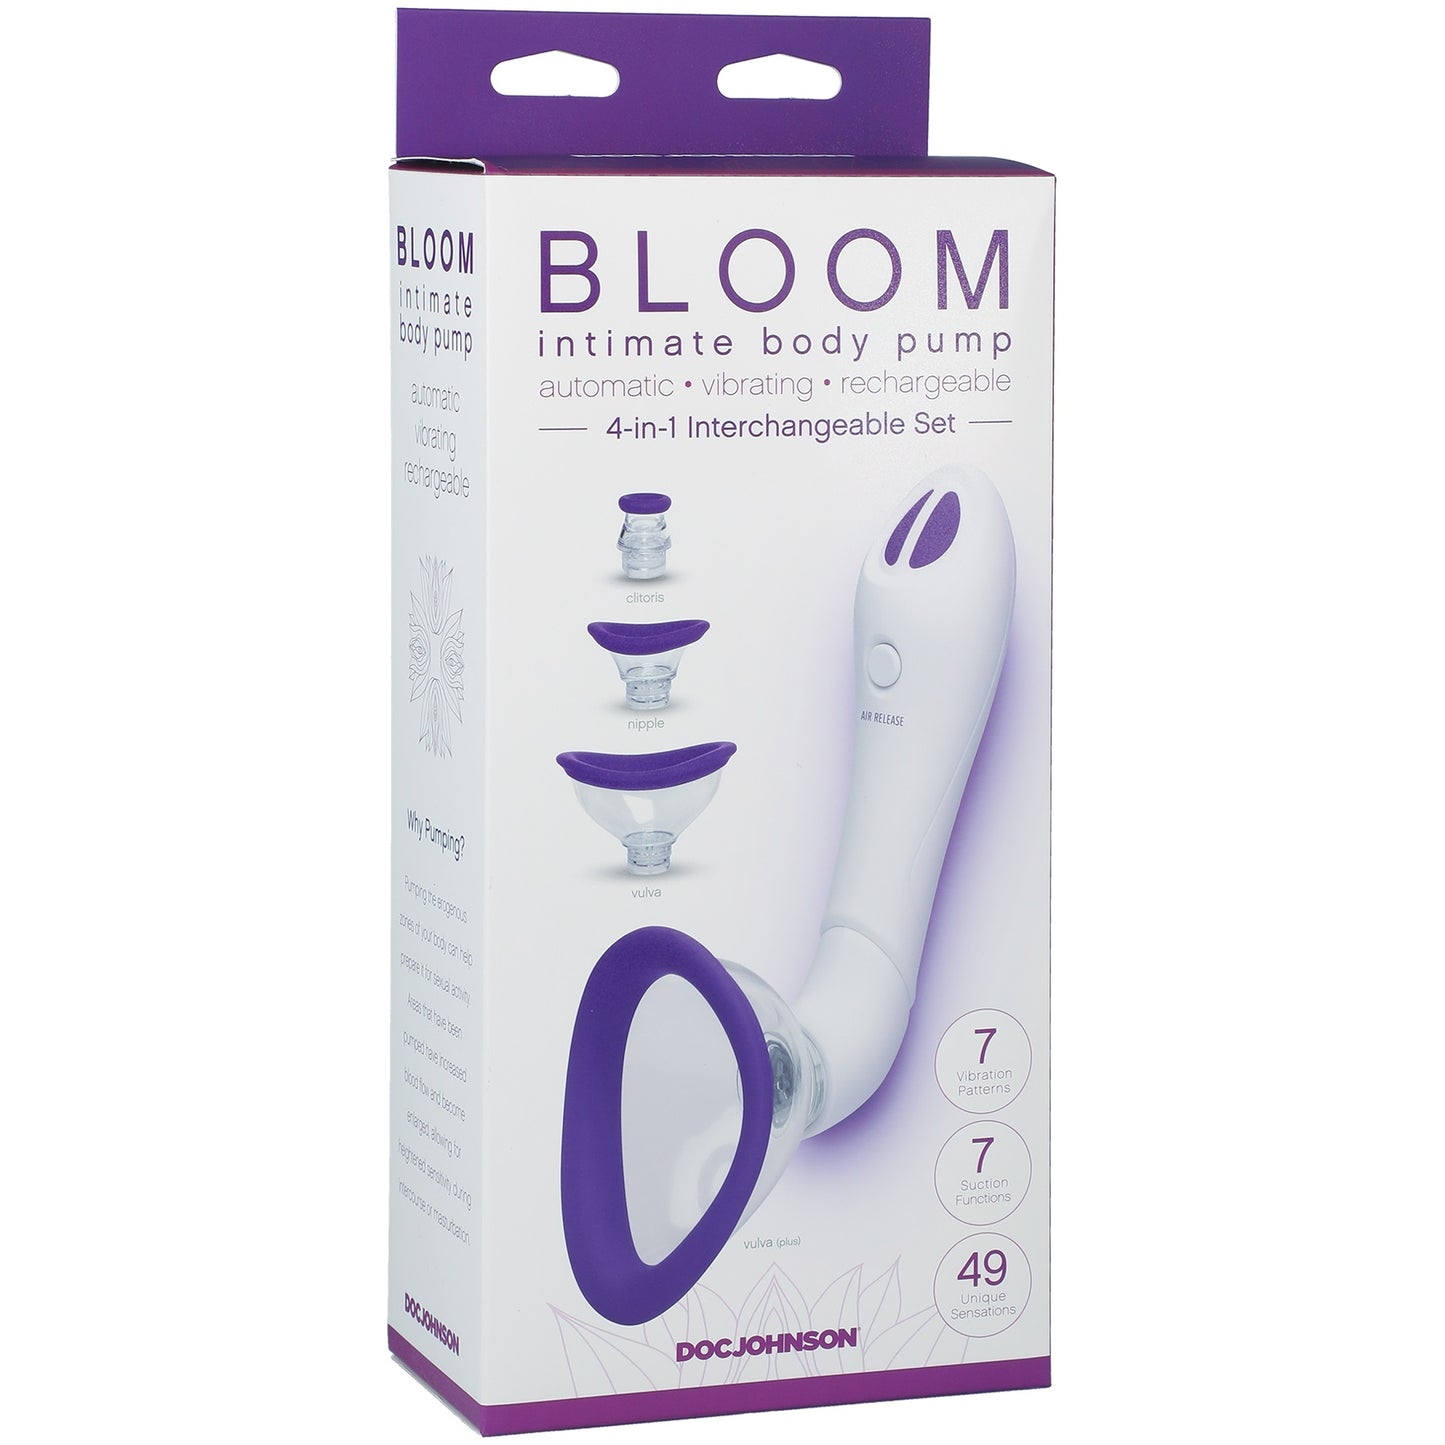 Bloom - Intimate Body Pump - Automatic - Vibrating - Rechargeable